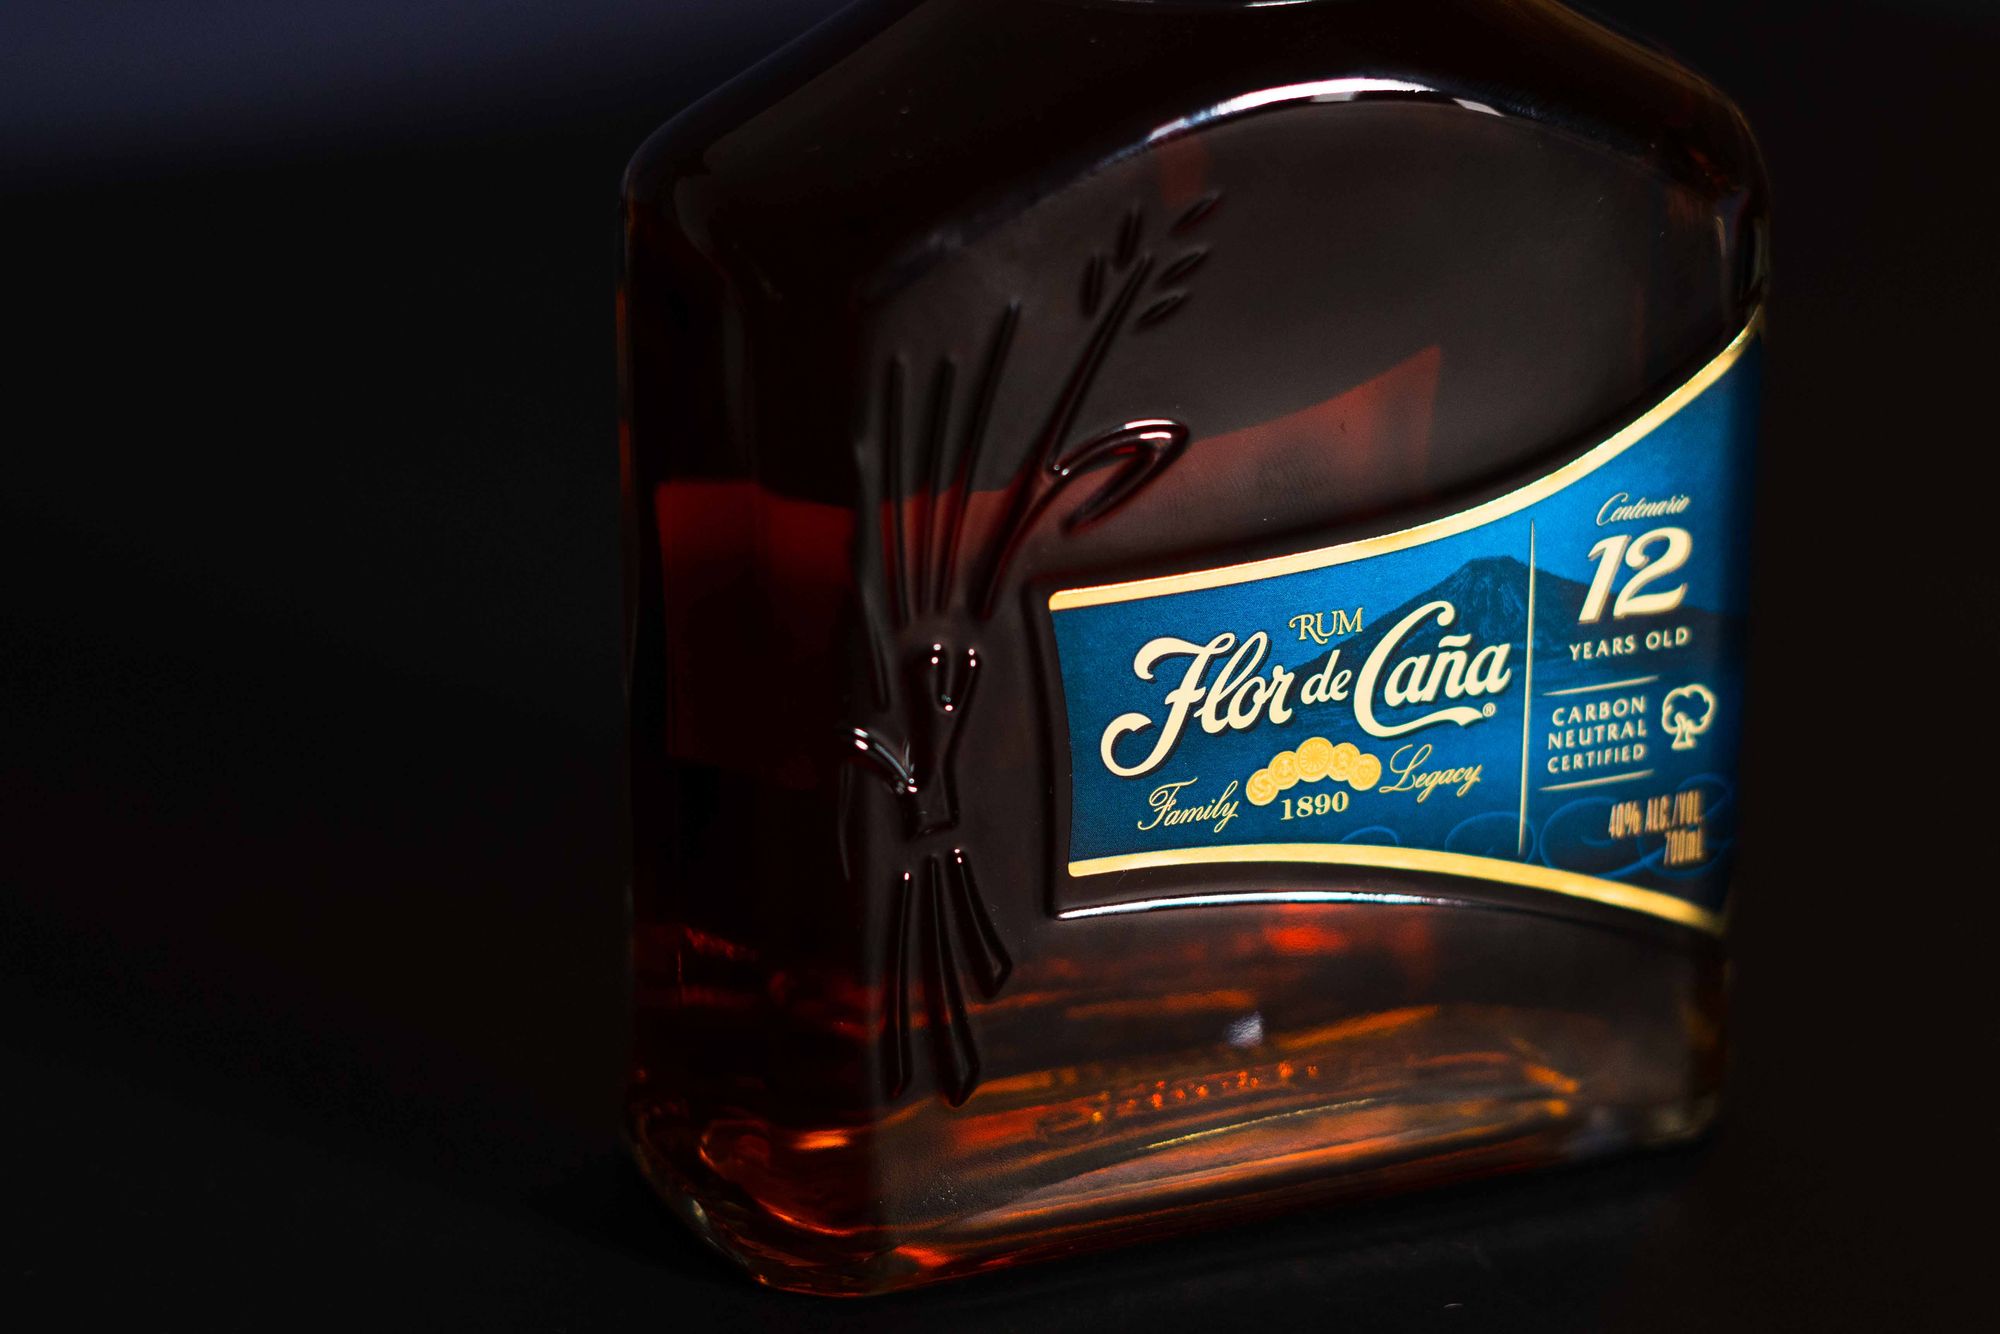 Flor de Caña 12 Years Old. Photo: Boothby